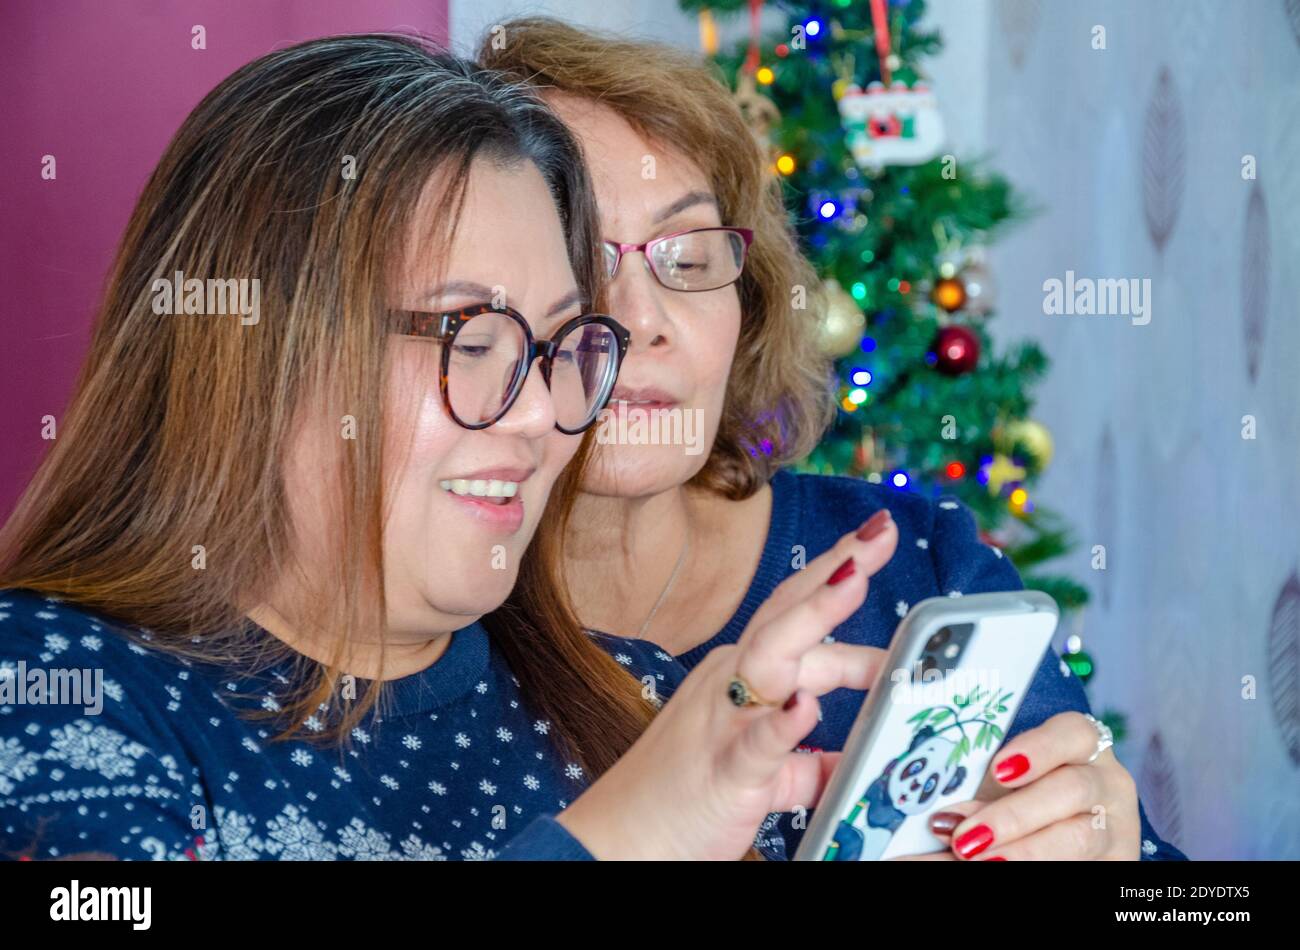 A mother and her grown up daughter look at something together on a mobile phone at Christmas time. Stock Photo